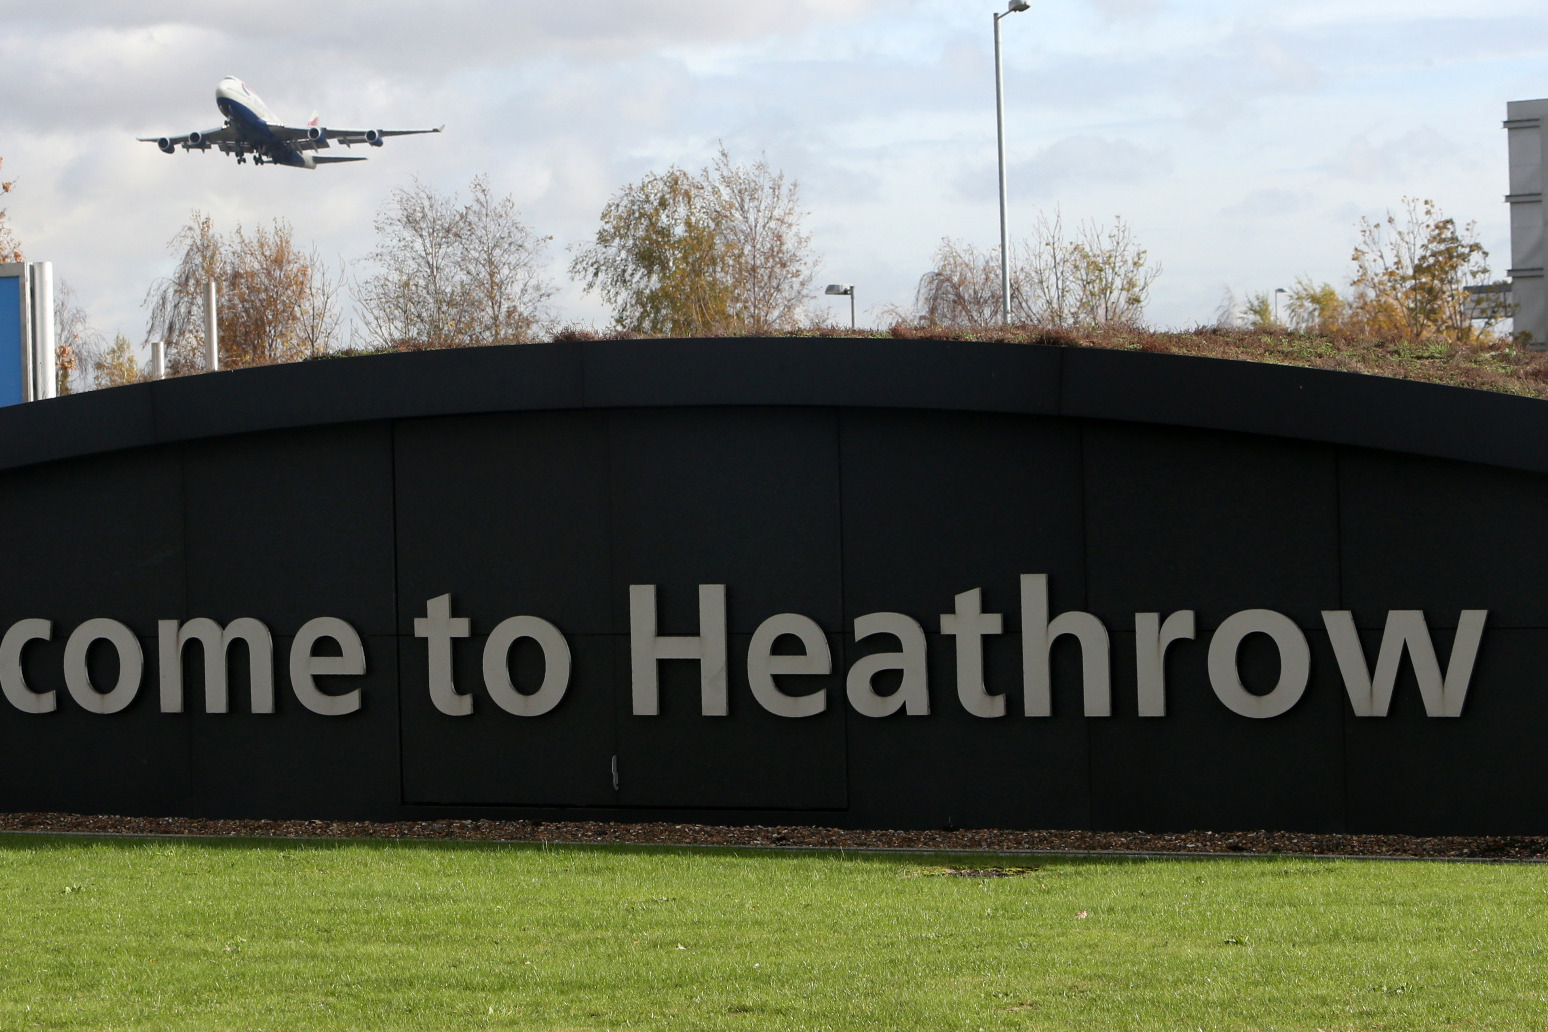 Competition regulator orders rethink on Heathrow charges 